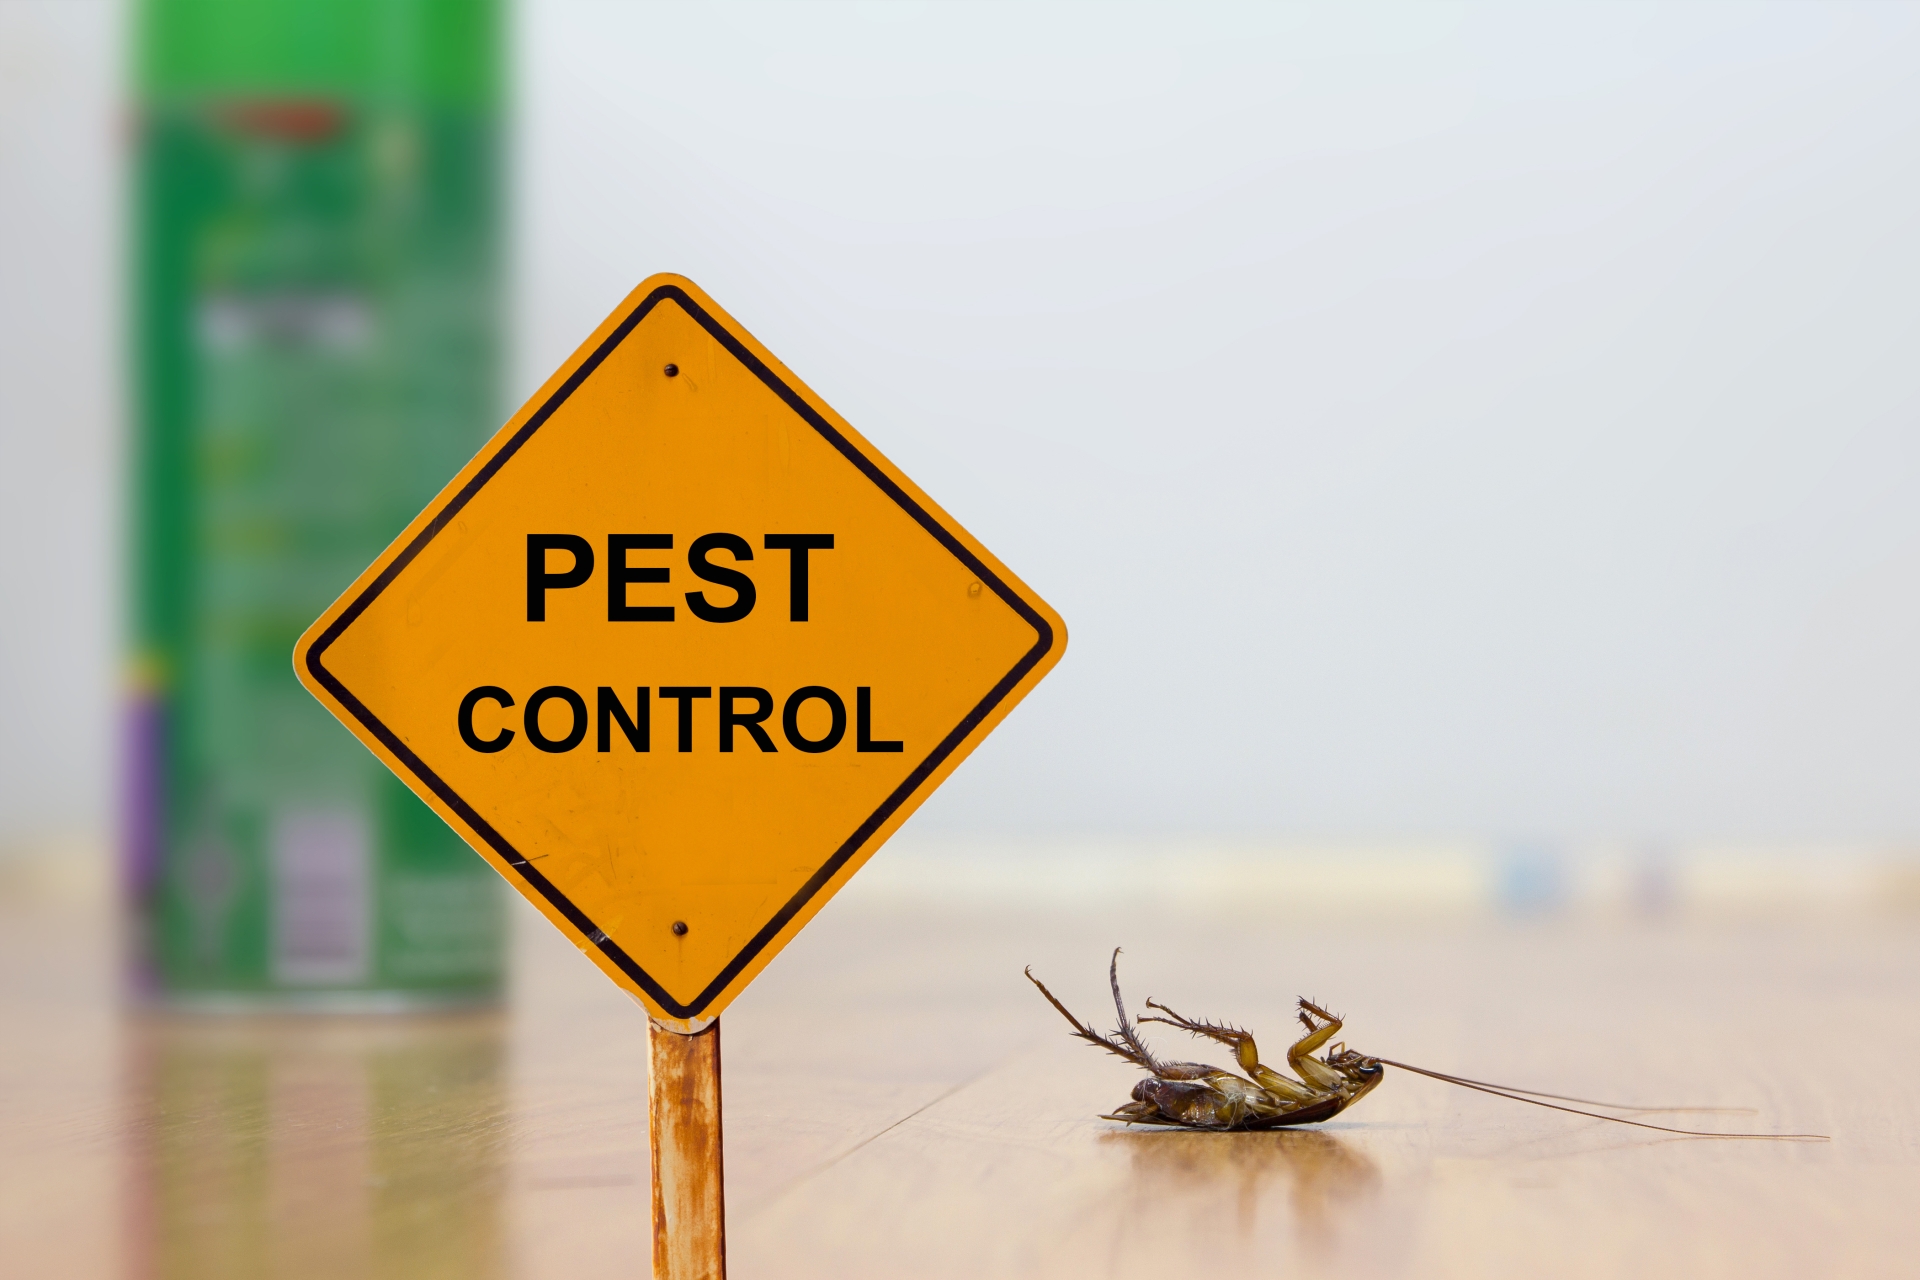 24 Hour Pest Control, Pest Control in Totteridge, Whetstone, N20. Call Now 020 8166 9746